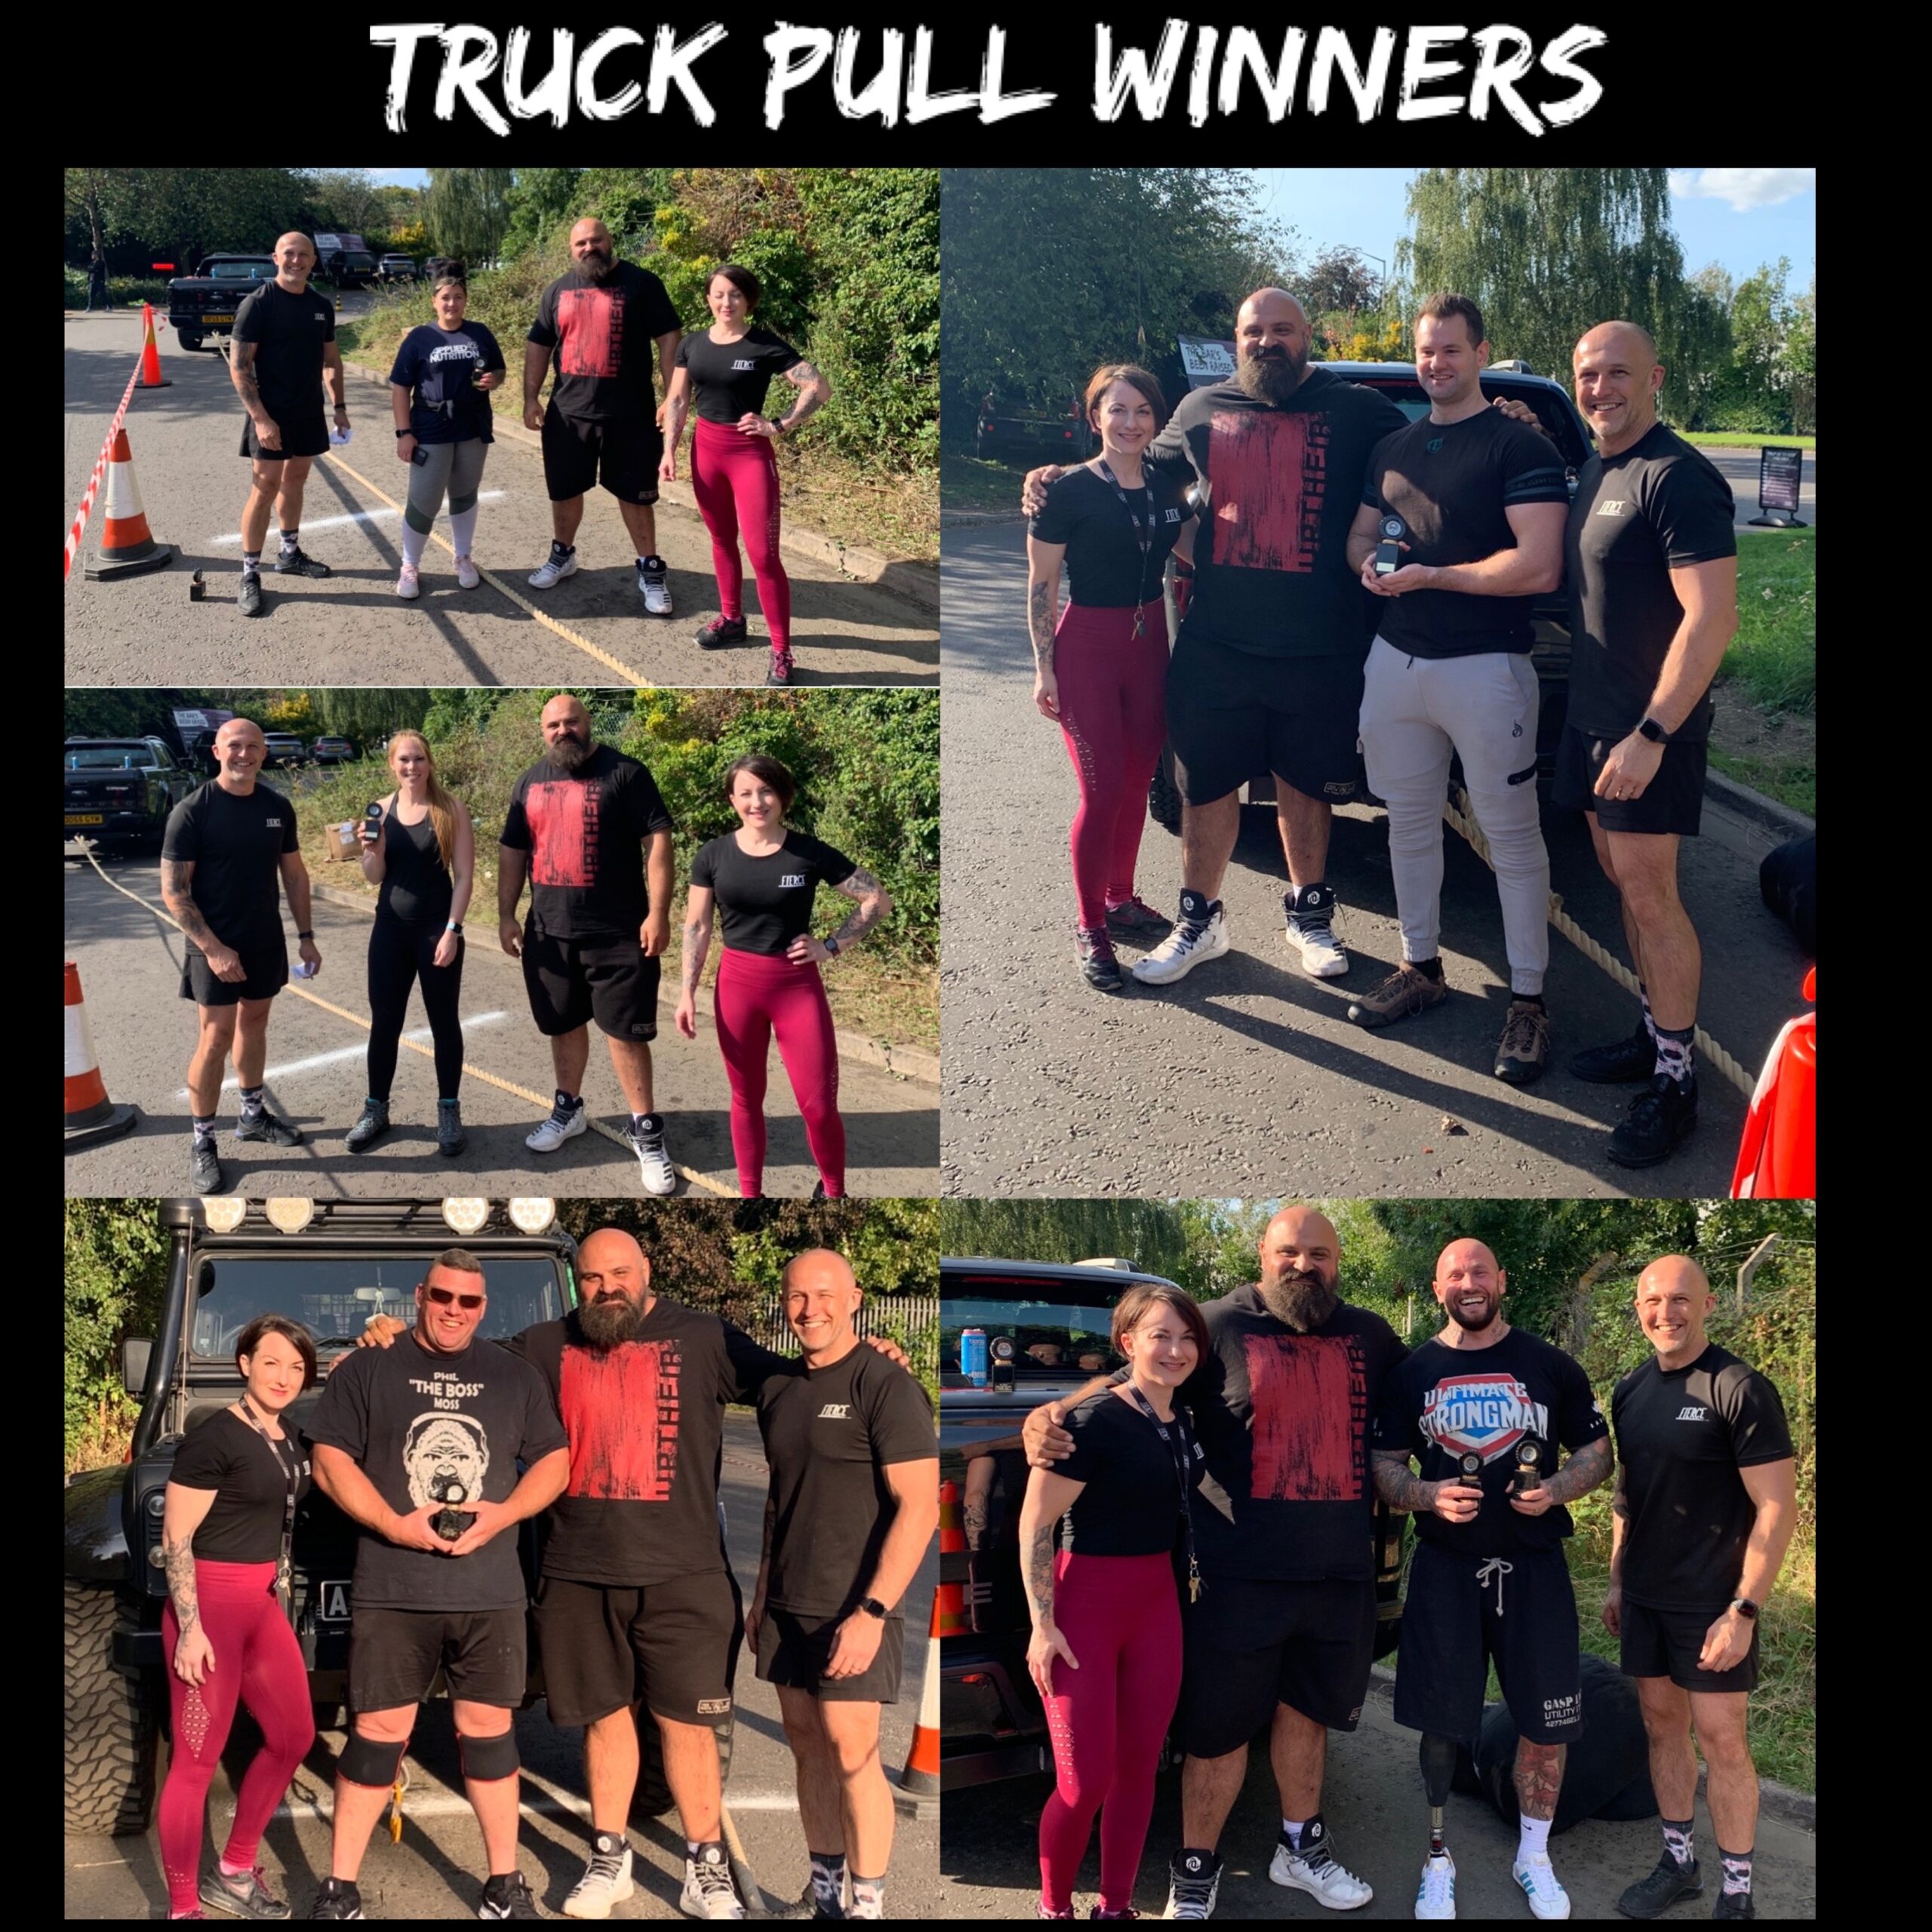 2020 CHARITY TRUCK PULL WITH LAURENCE SHAHLEAI